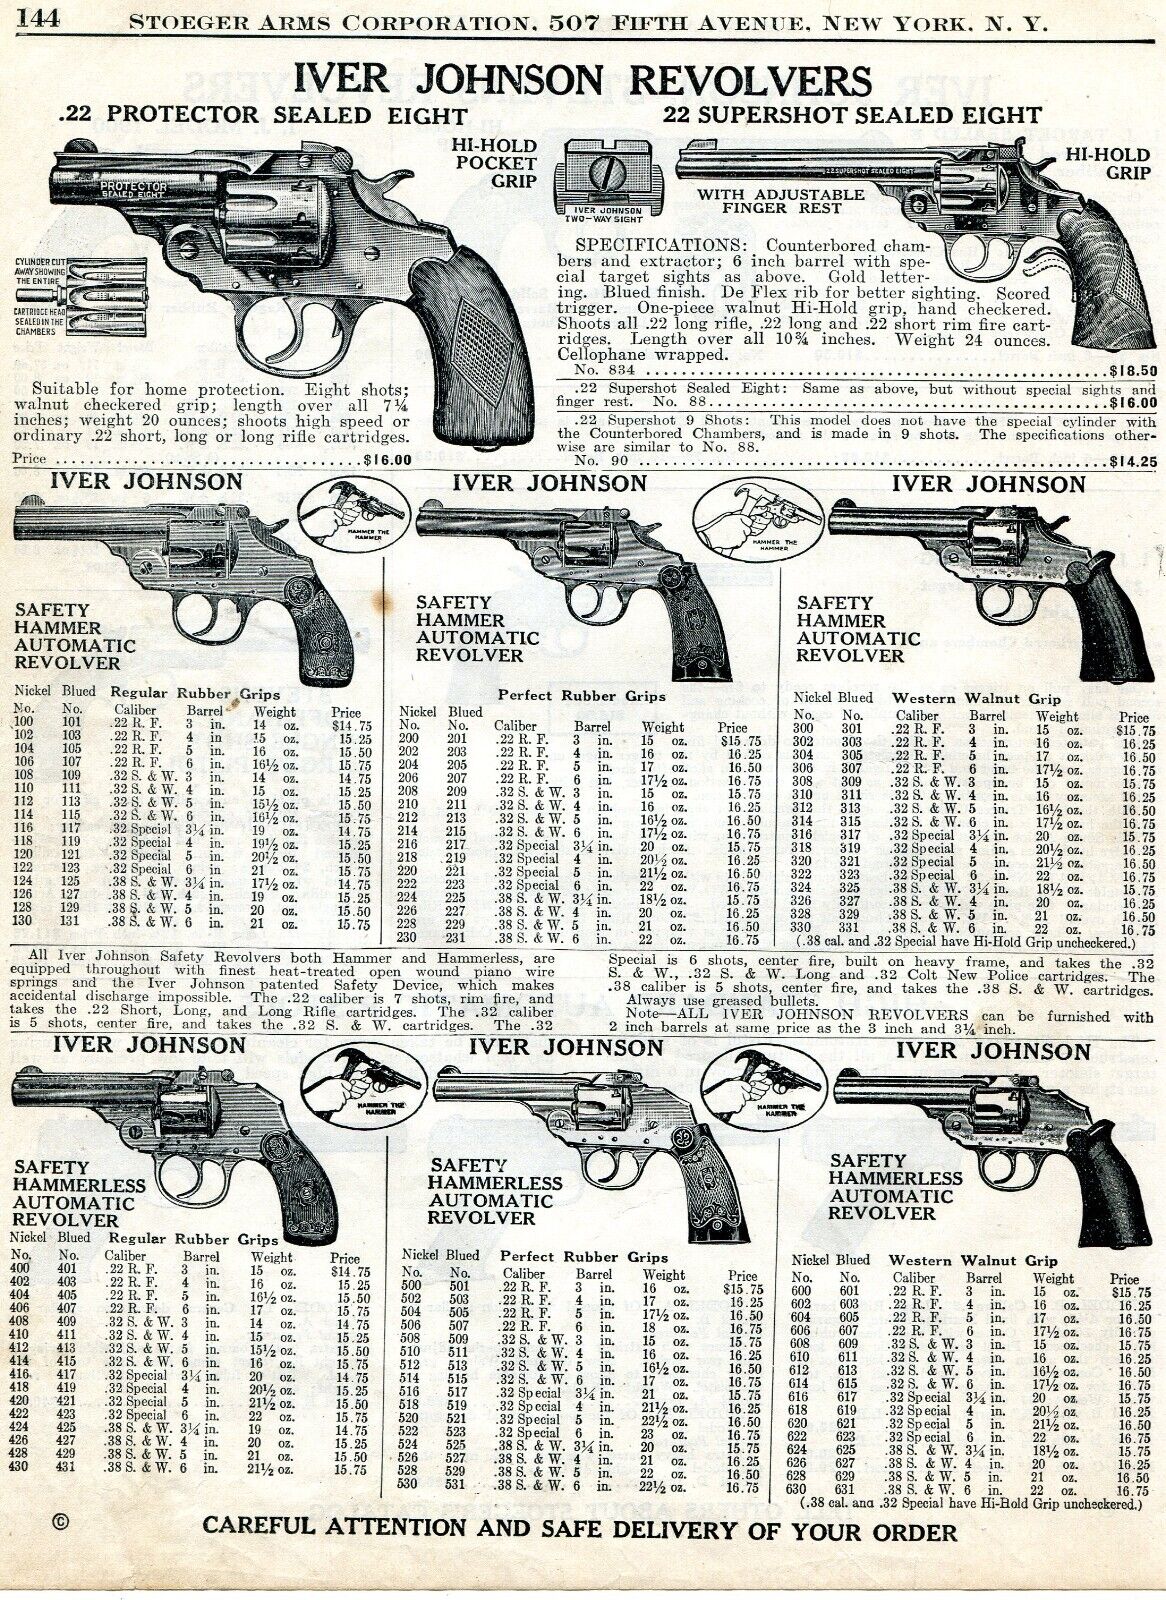 1939 Print Ad of Iver Johnson Protector, Supershot Sealed Eight, Safety Revolver